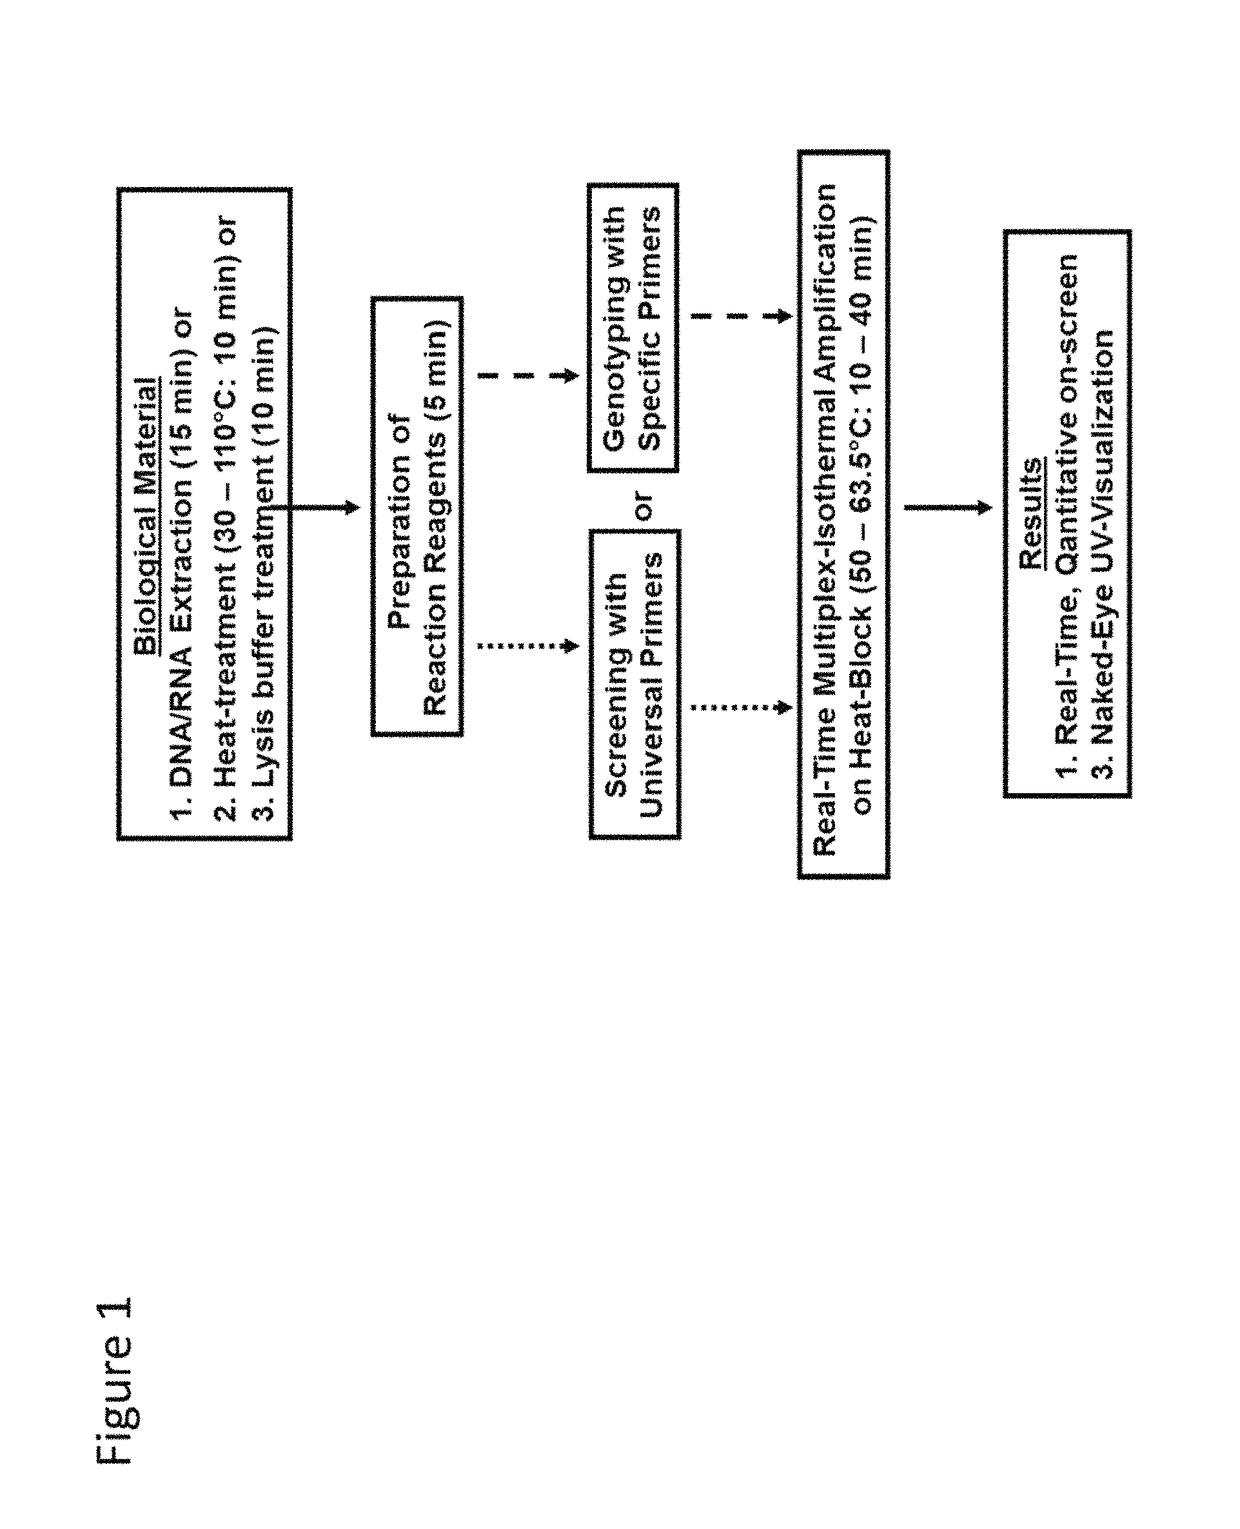 Methods for real-time multiplex isothermal detection and identification of bacterial, viral, and protozoan nucleic acids